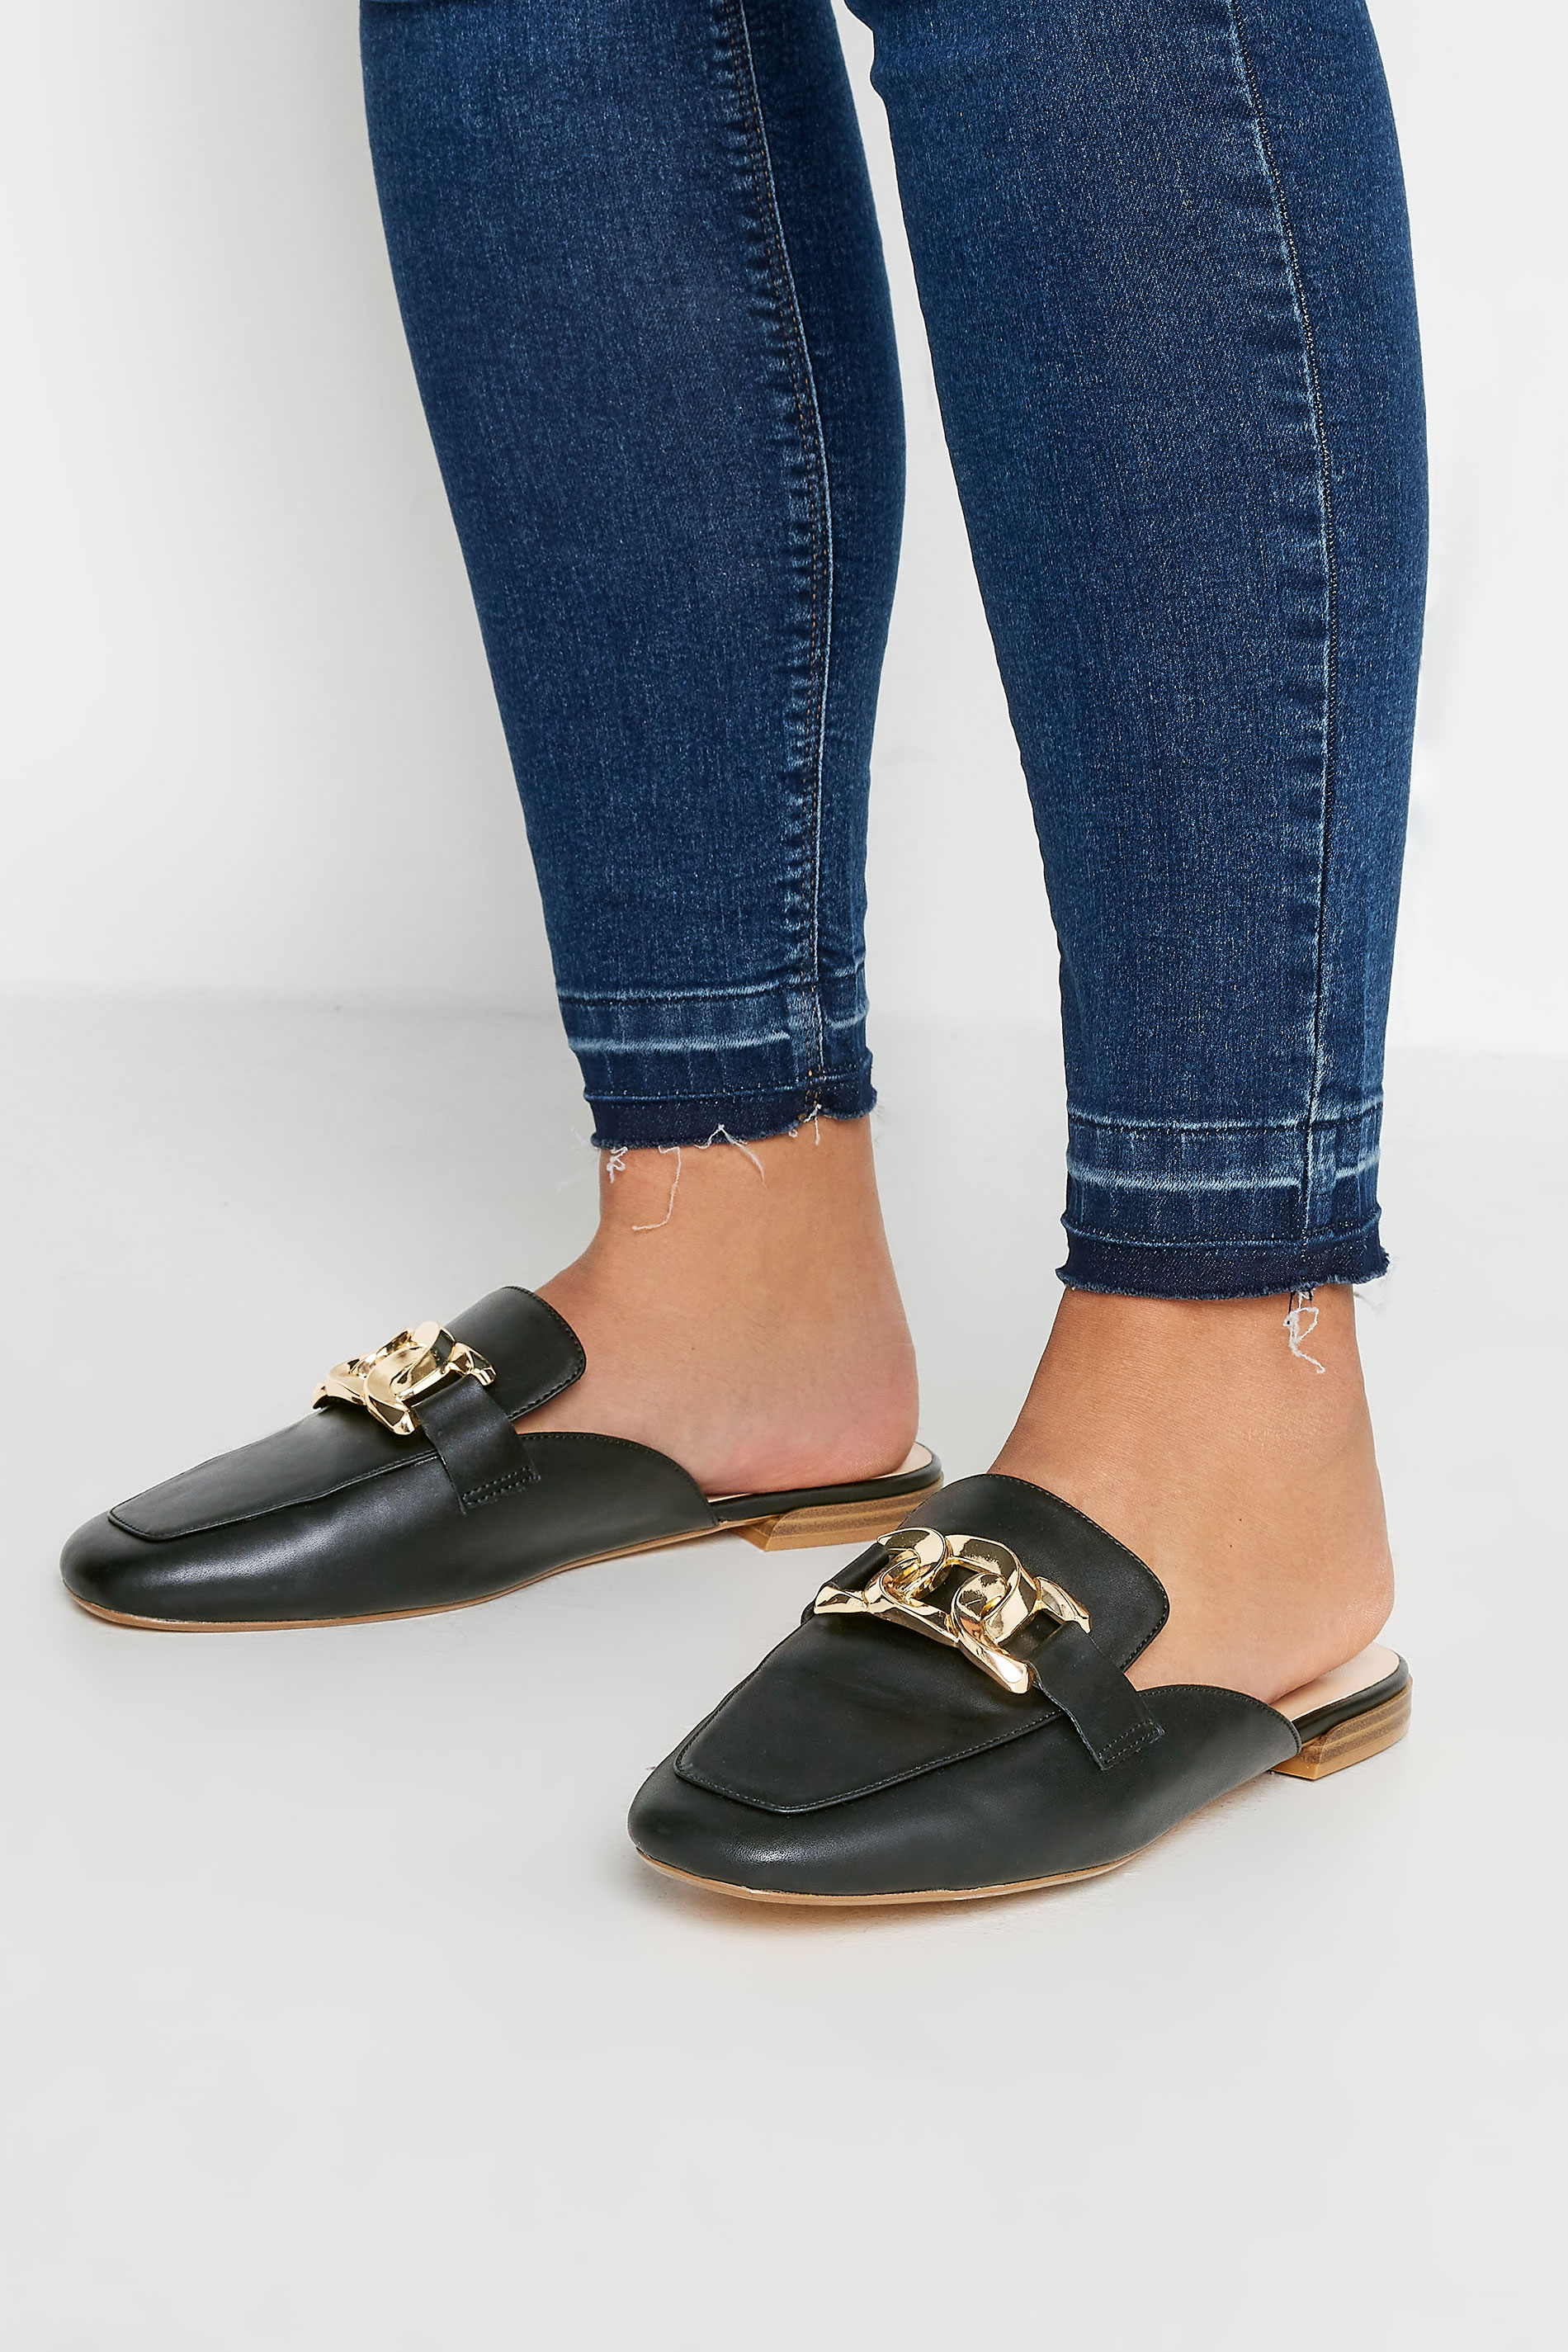 Black Chain Detail Mule Loafers In Extra Wide EEE Fit | Yours Clothing 1